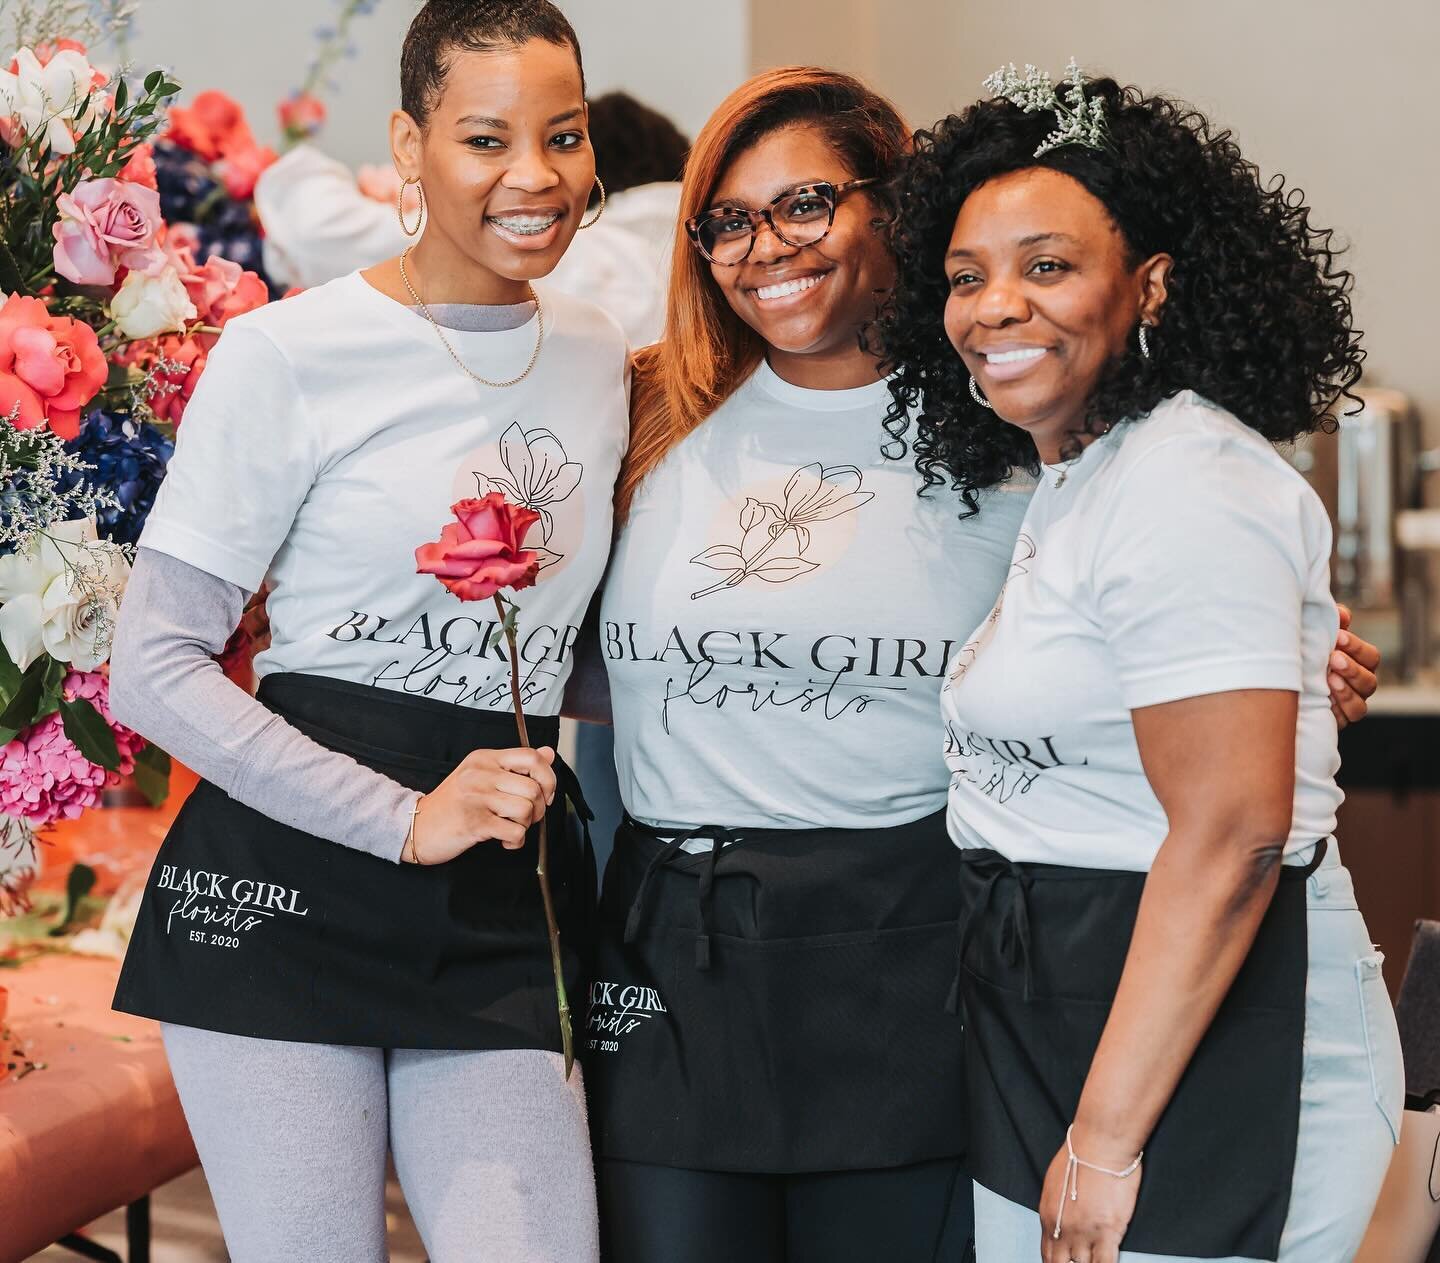 The countdown is almost complete and the Black Girl Florists Conference is this week! 🌹🪻🌸🌻

On Wednesday we will welcome Black women in floral design from ALL over. We will host various sessions and gatherings based on our expression in the flora